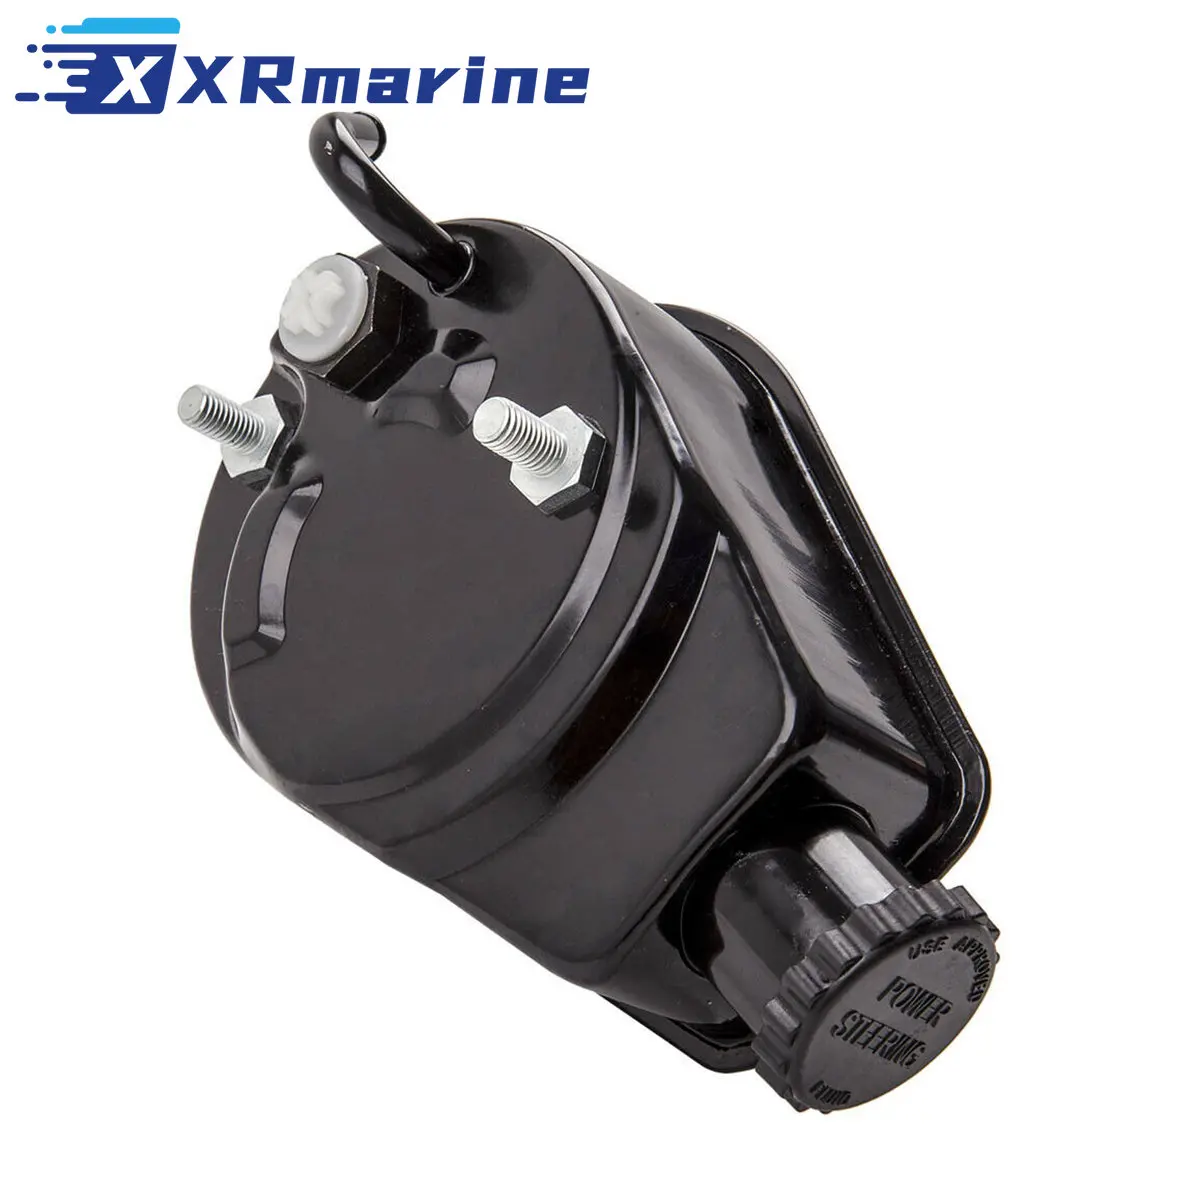 16792A39 Power Steering Pump for Mercruiser BRAVO ALPHA Stern Drive 90496A5 16792A33 16792A1 18-7508 kutou camera charger ac pw20 ac power adapter dc coupler charger set for sony alpha a6500 a7 a7ii a55 rx10 nex 5 nex 3 camera